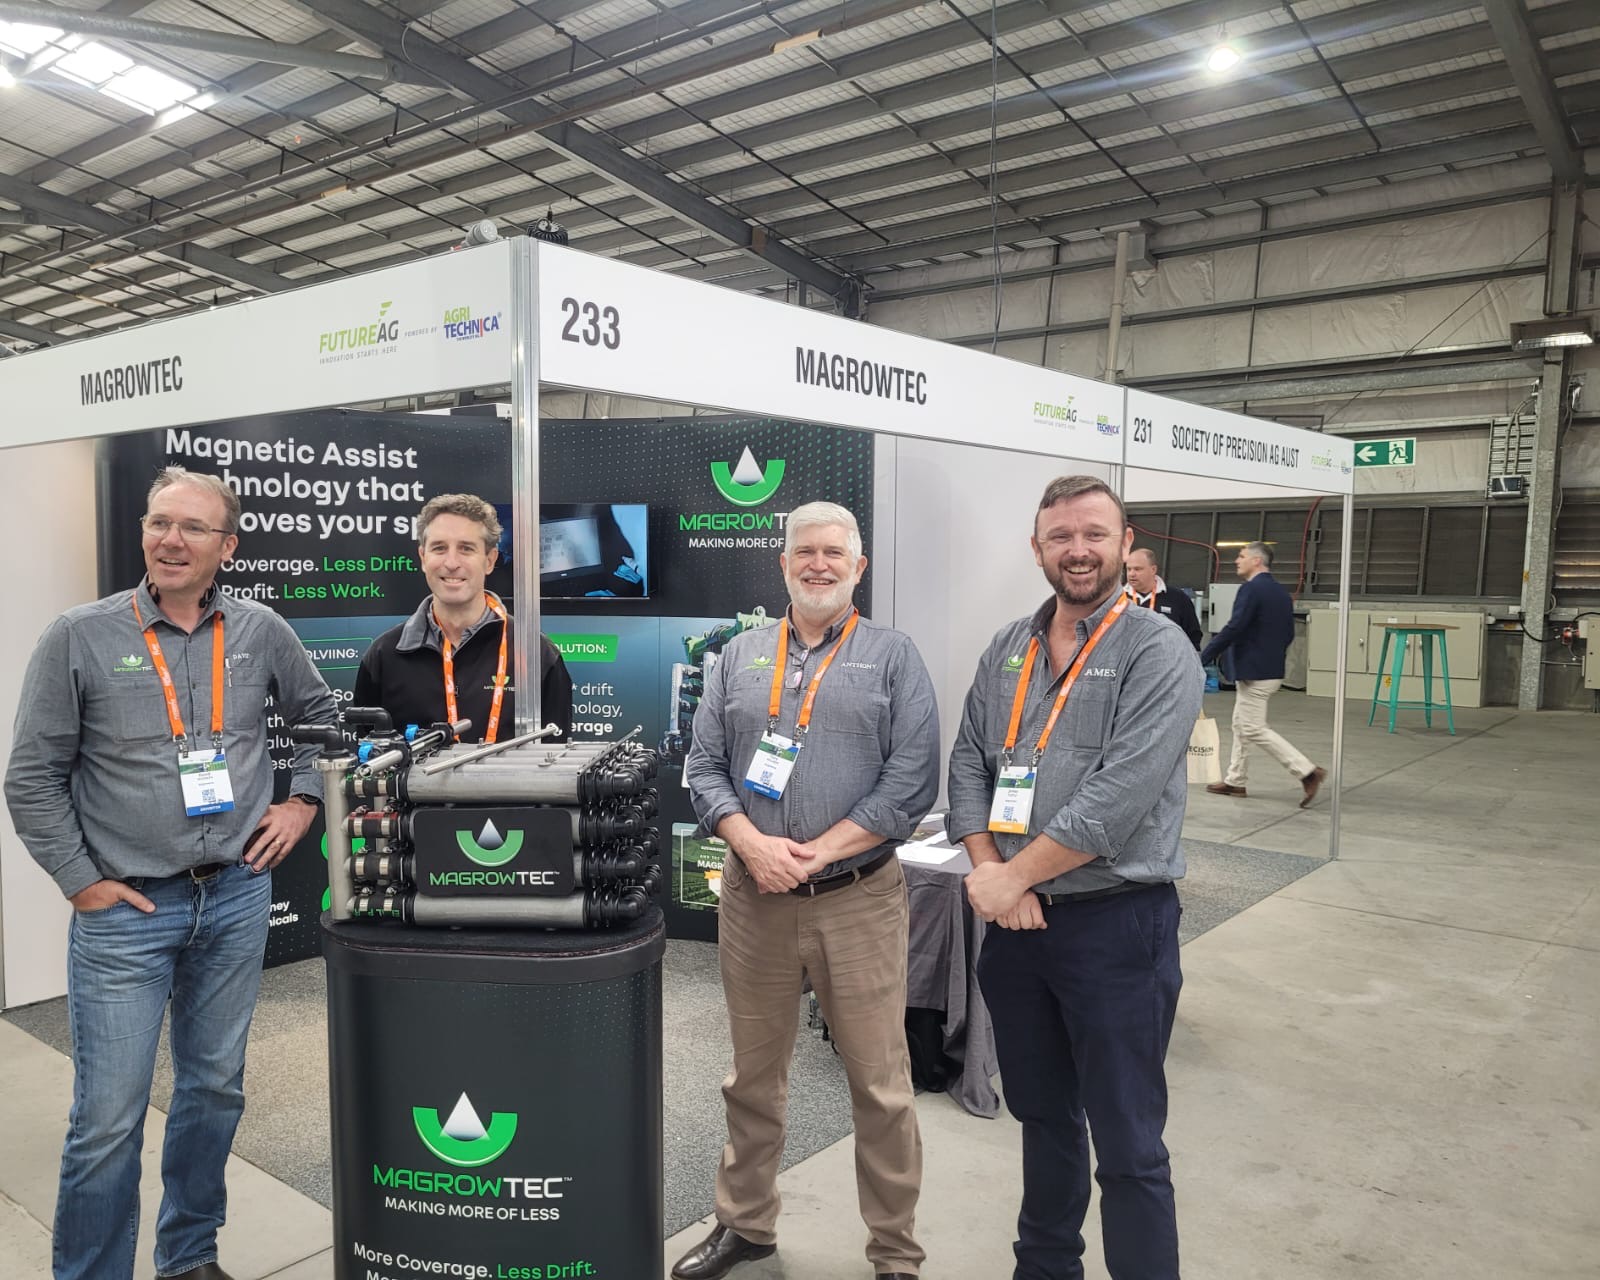 MagrowTec is exhibiting at the Future Ag Expo in Melbourne